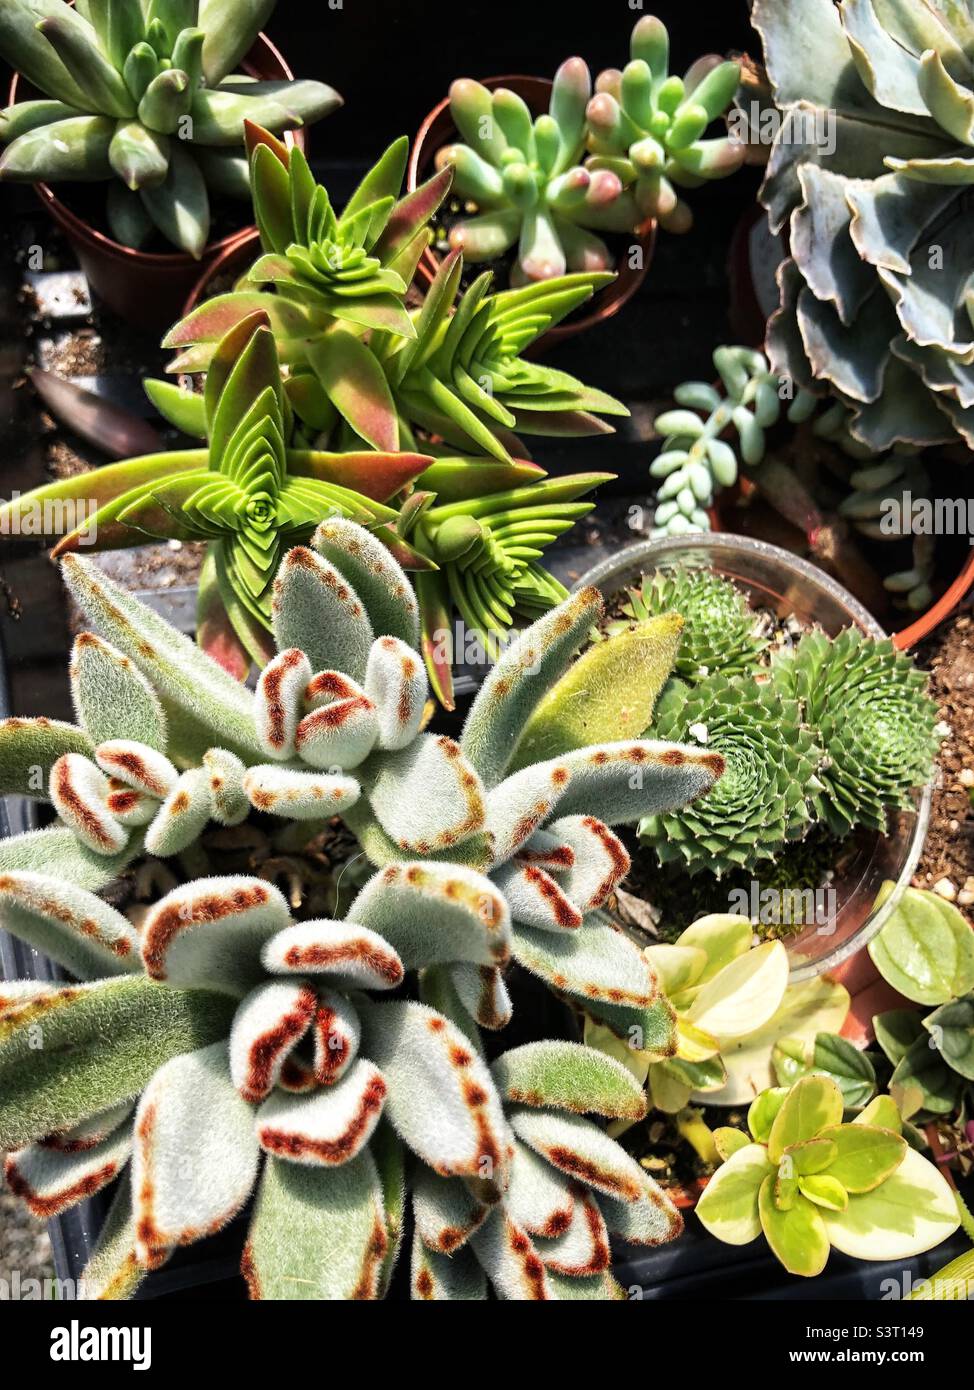 Variety of succulents from the garden center Stock Photo